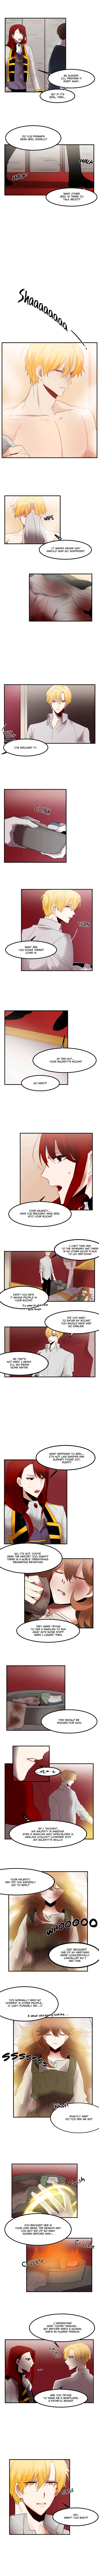 Living As The Emperor's Fiancé - 10 page 2